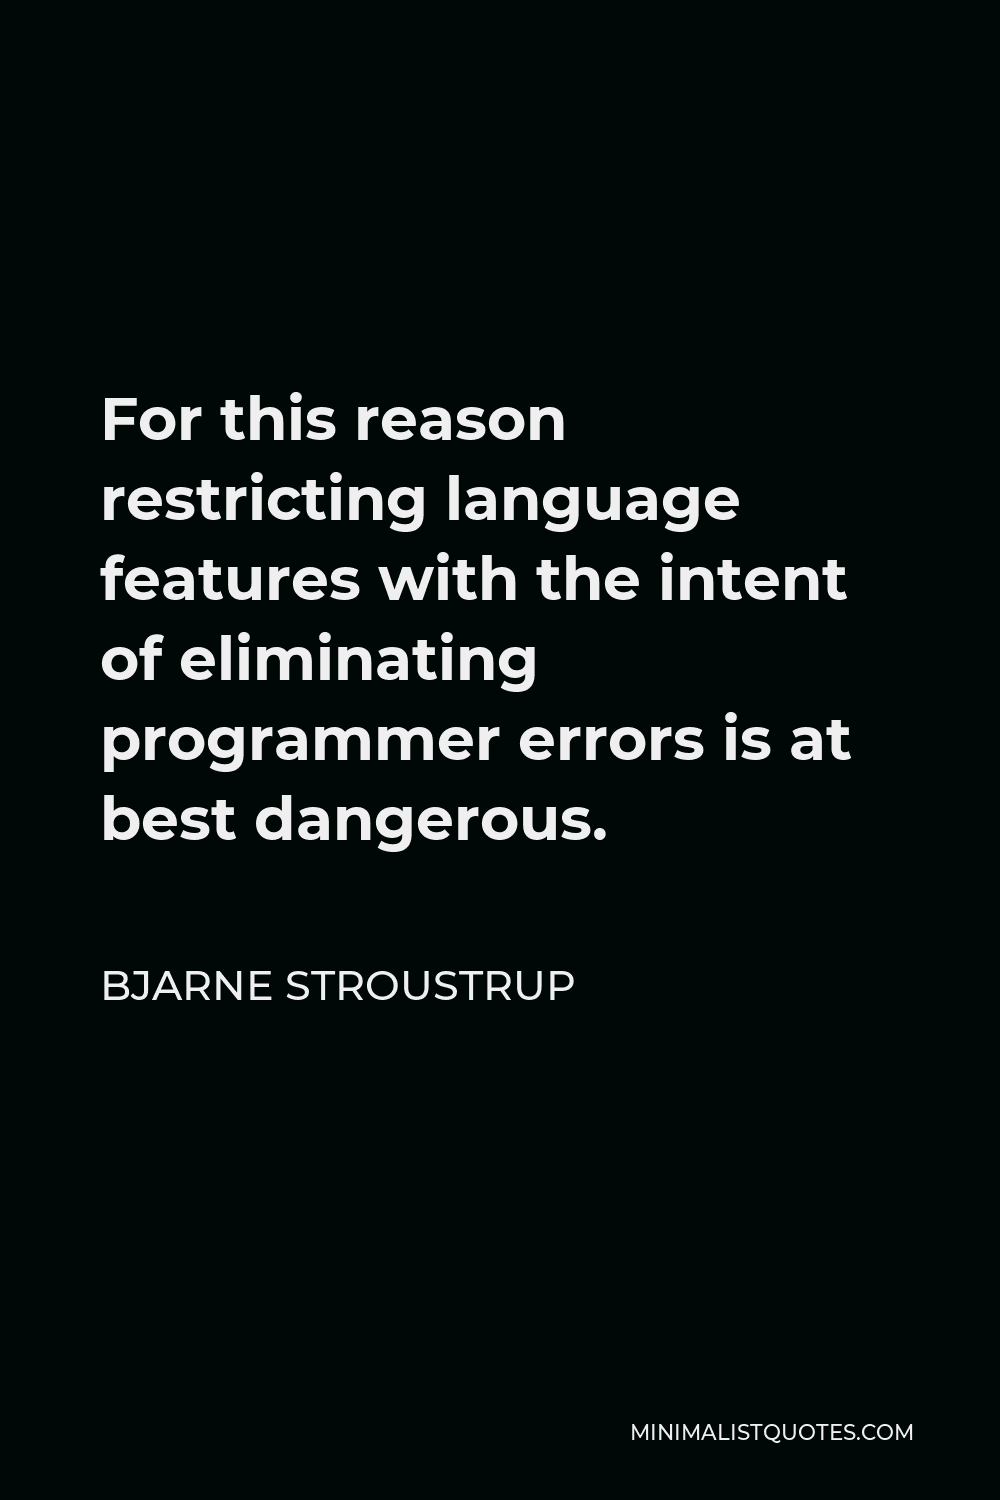 Bjarne Stroustrup Quote - For this reason restricting language features with the intent of eliminating programmer errors is at best dangerous.